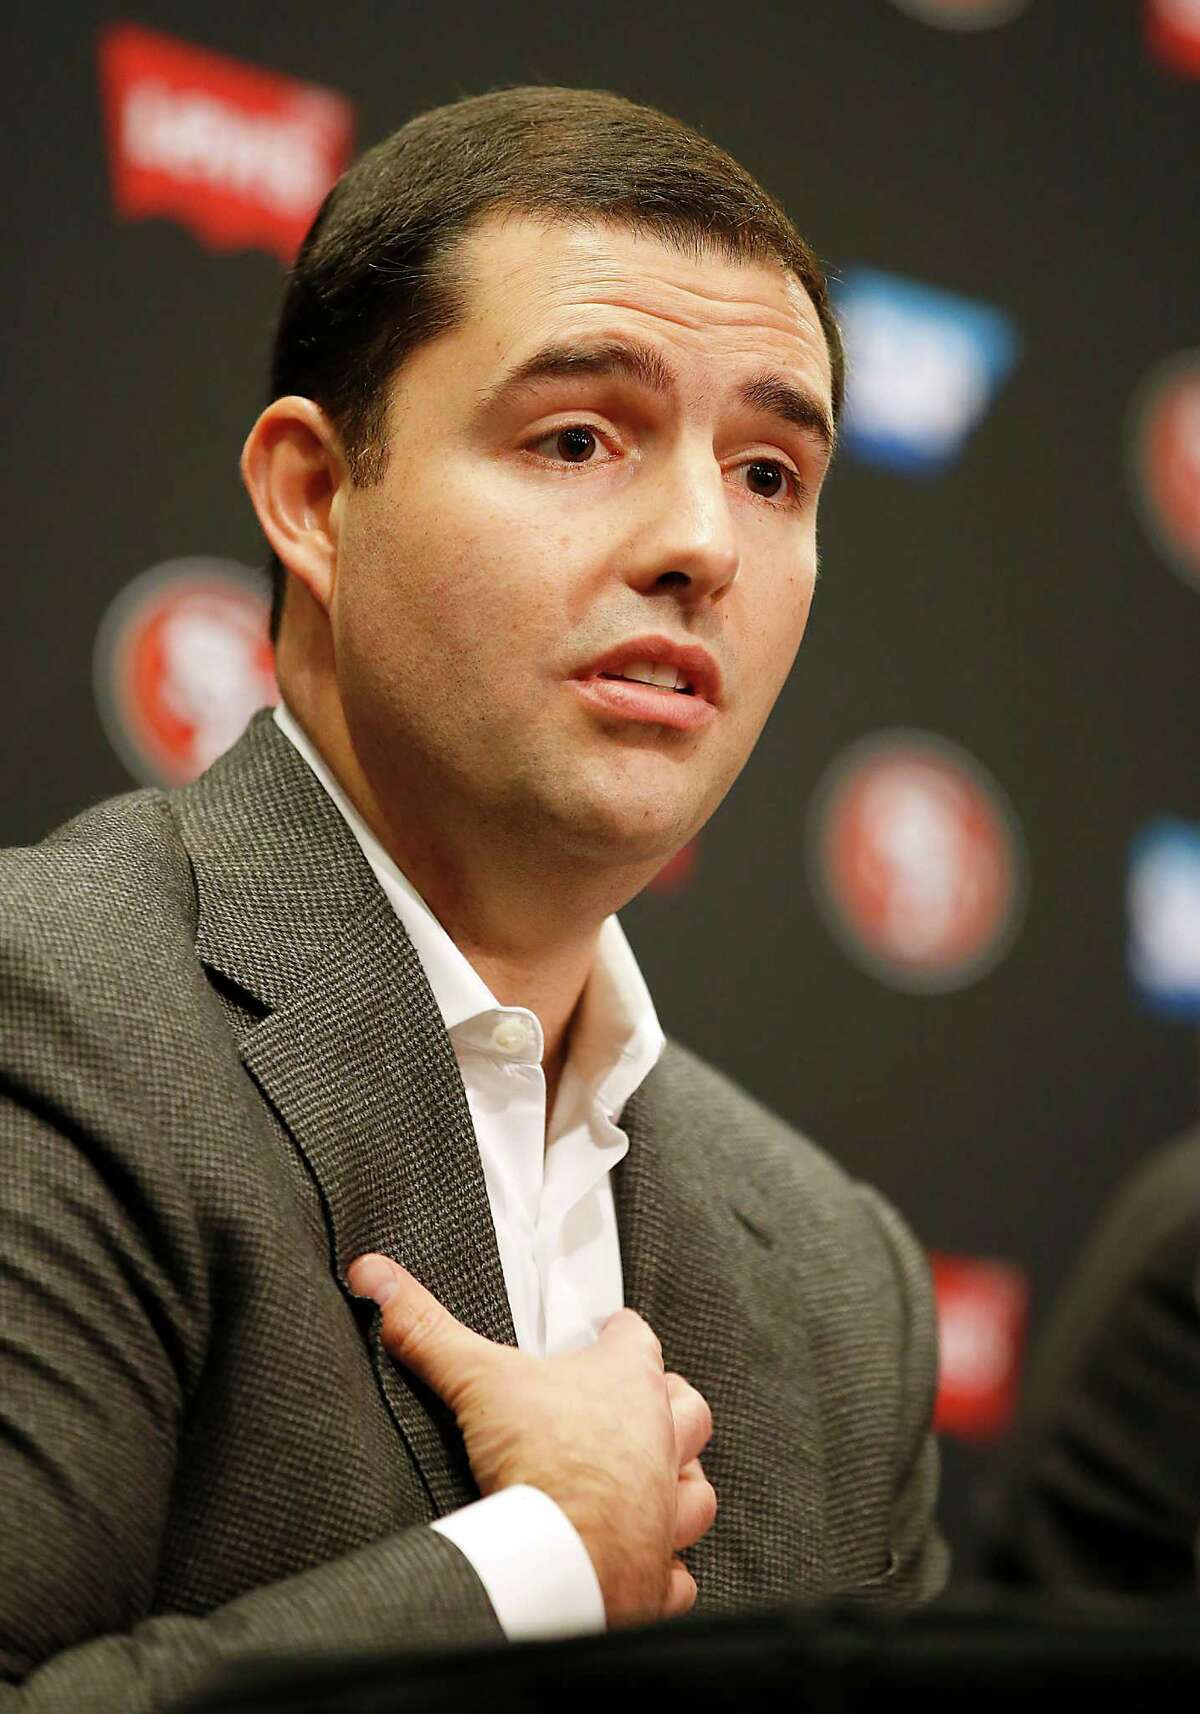 San Francisco 49ers owner Jed York speaks during a news conference at 49ers football headquarters in Santa Clara, Calif., Monday, Dec. 29, 2014. (AP Photo/Tony Avelar)